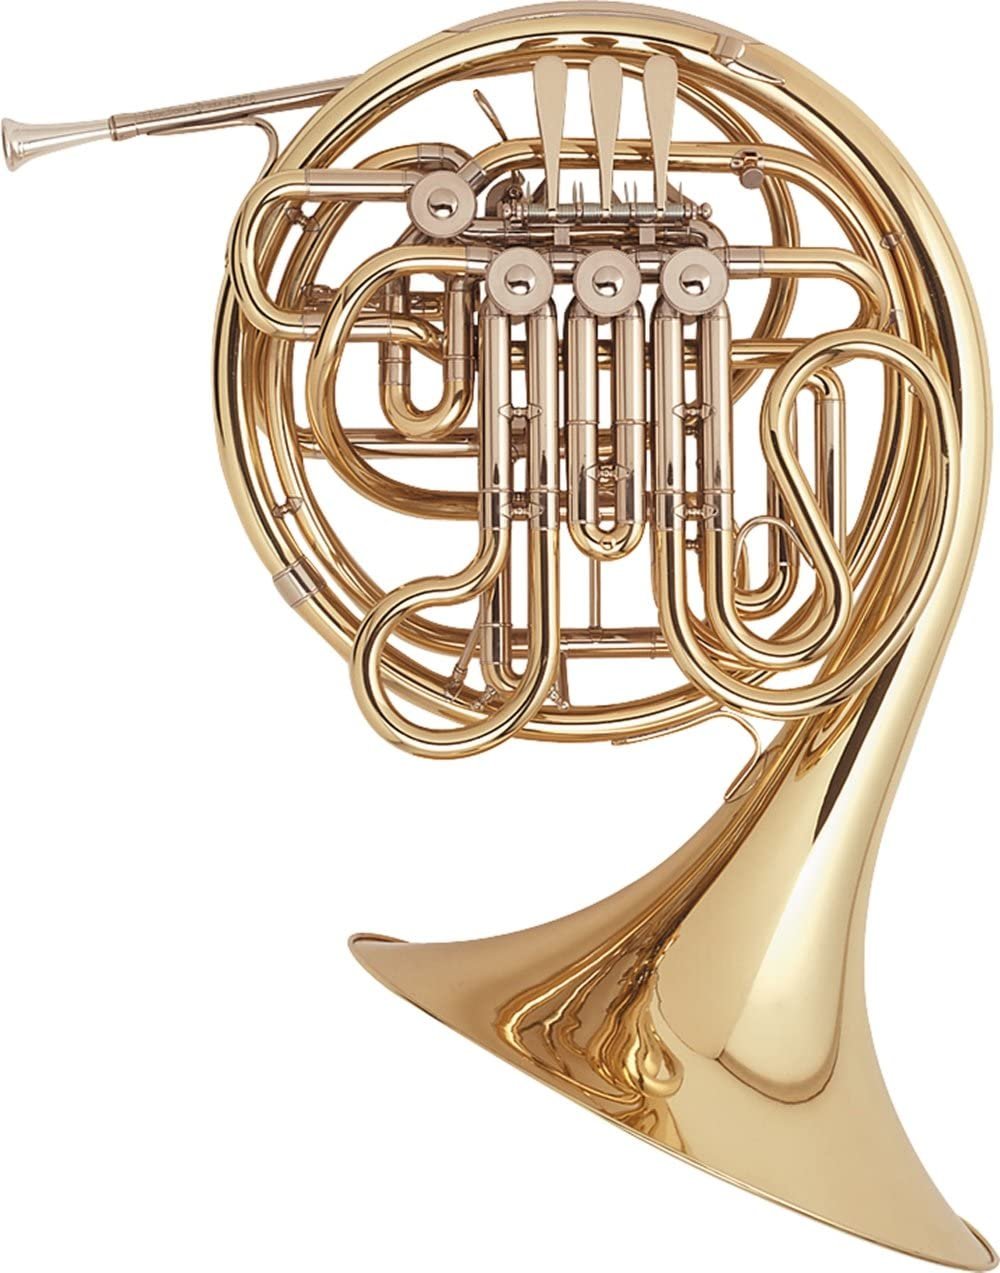 Holton H378 Intermediate Double French Horn Key of F/Bb